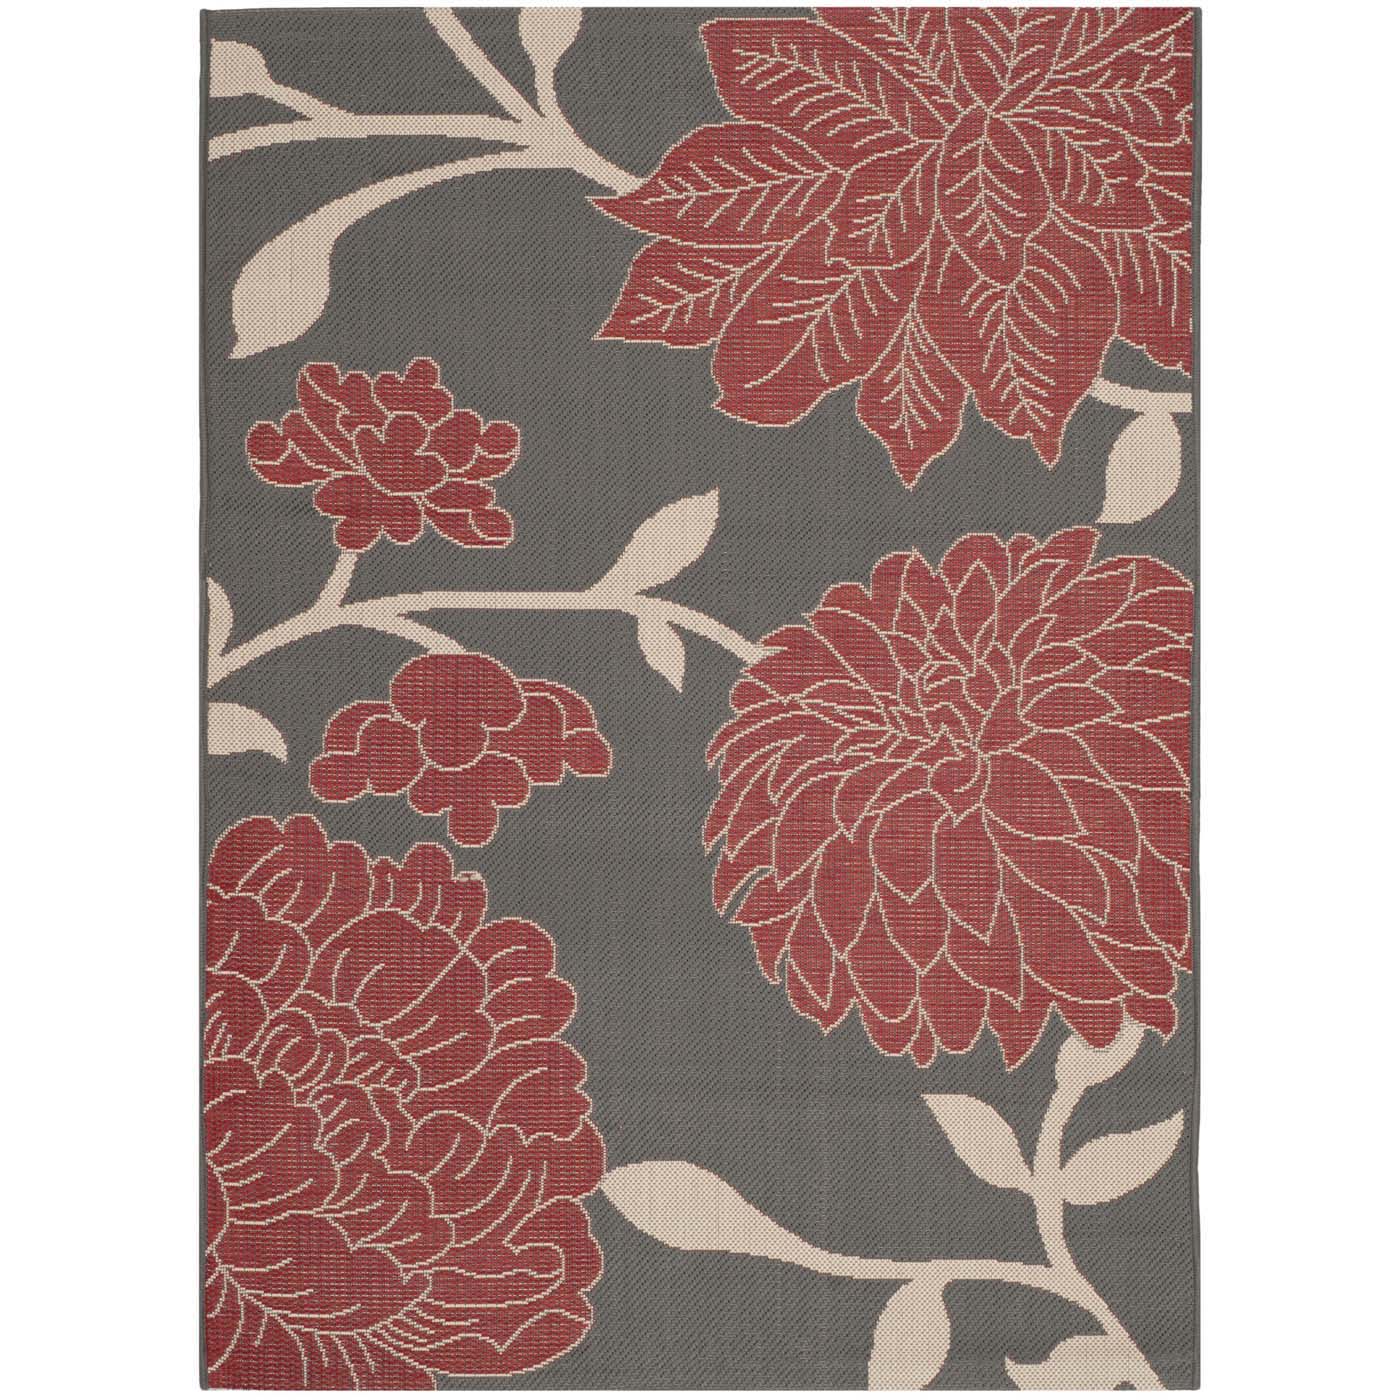 Safavieh Courtyard 321 Rug, CY7321 - ANTHRACITE / RED